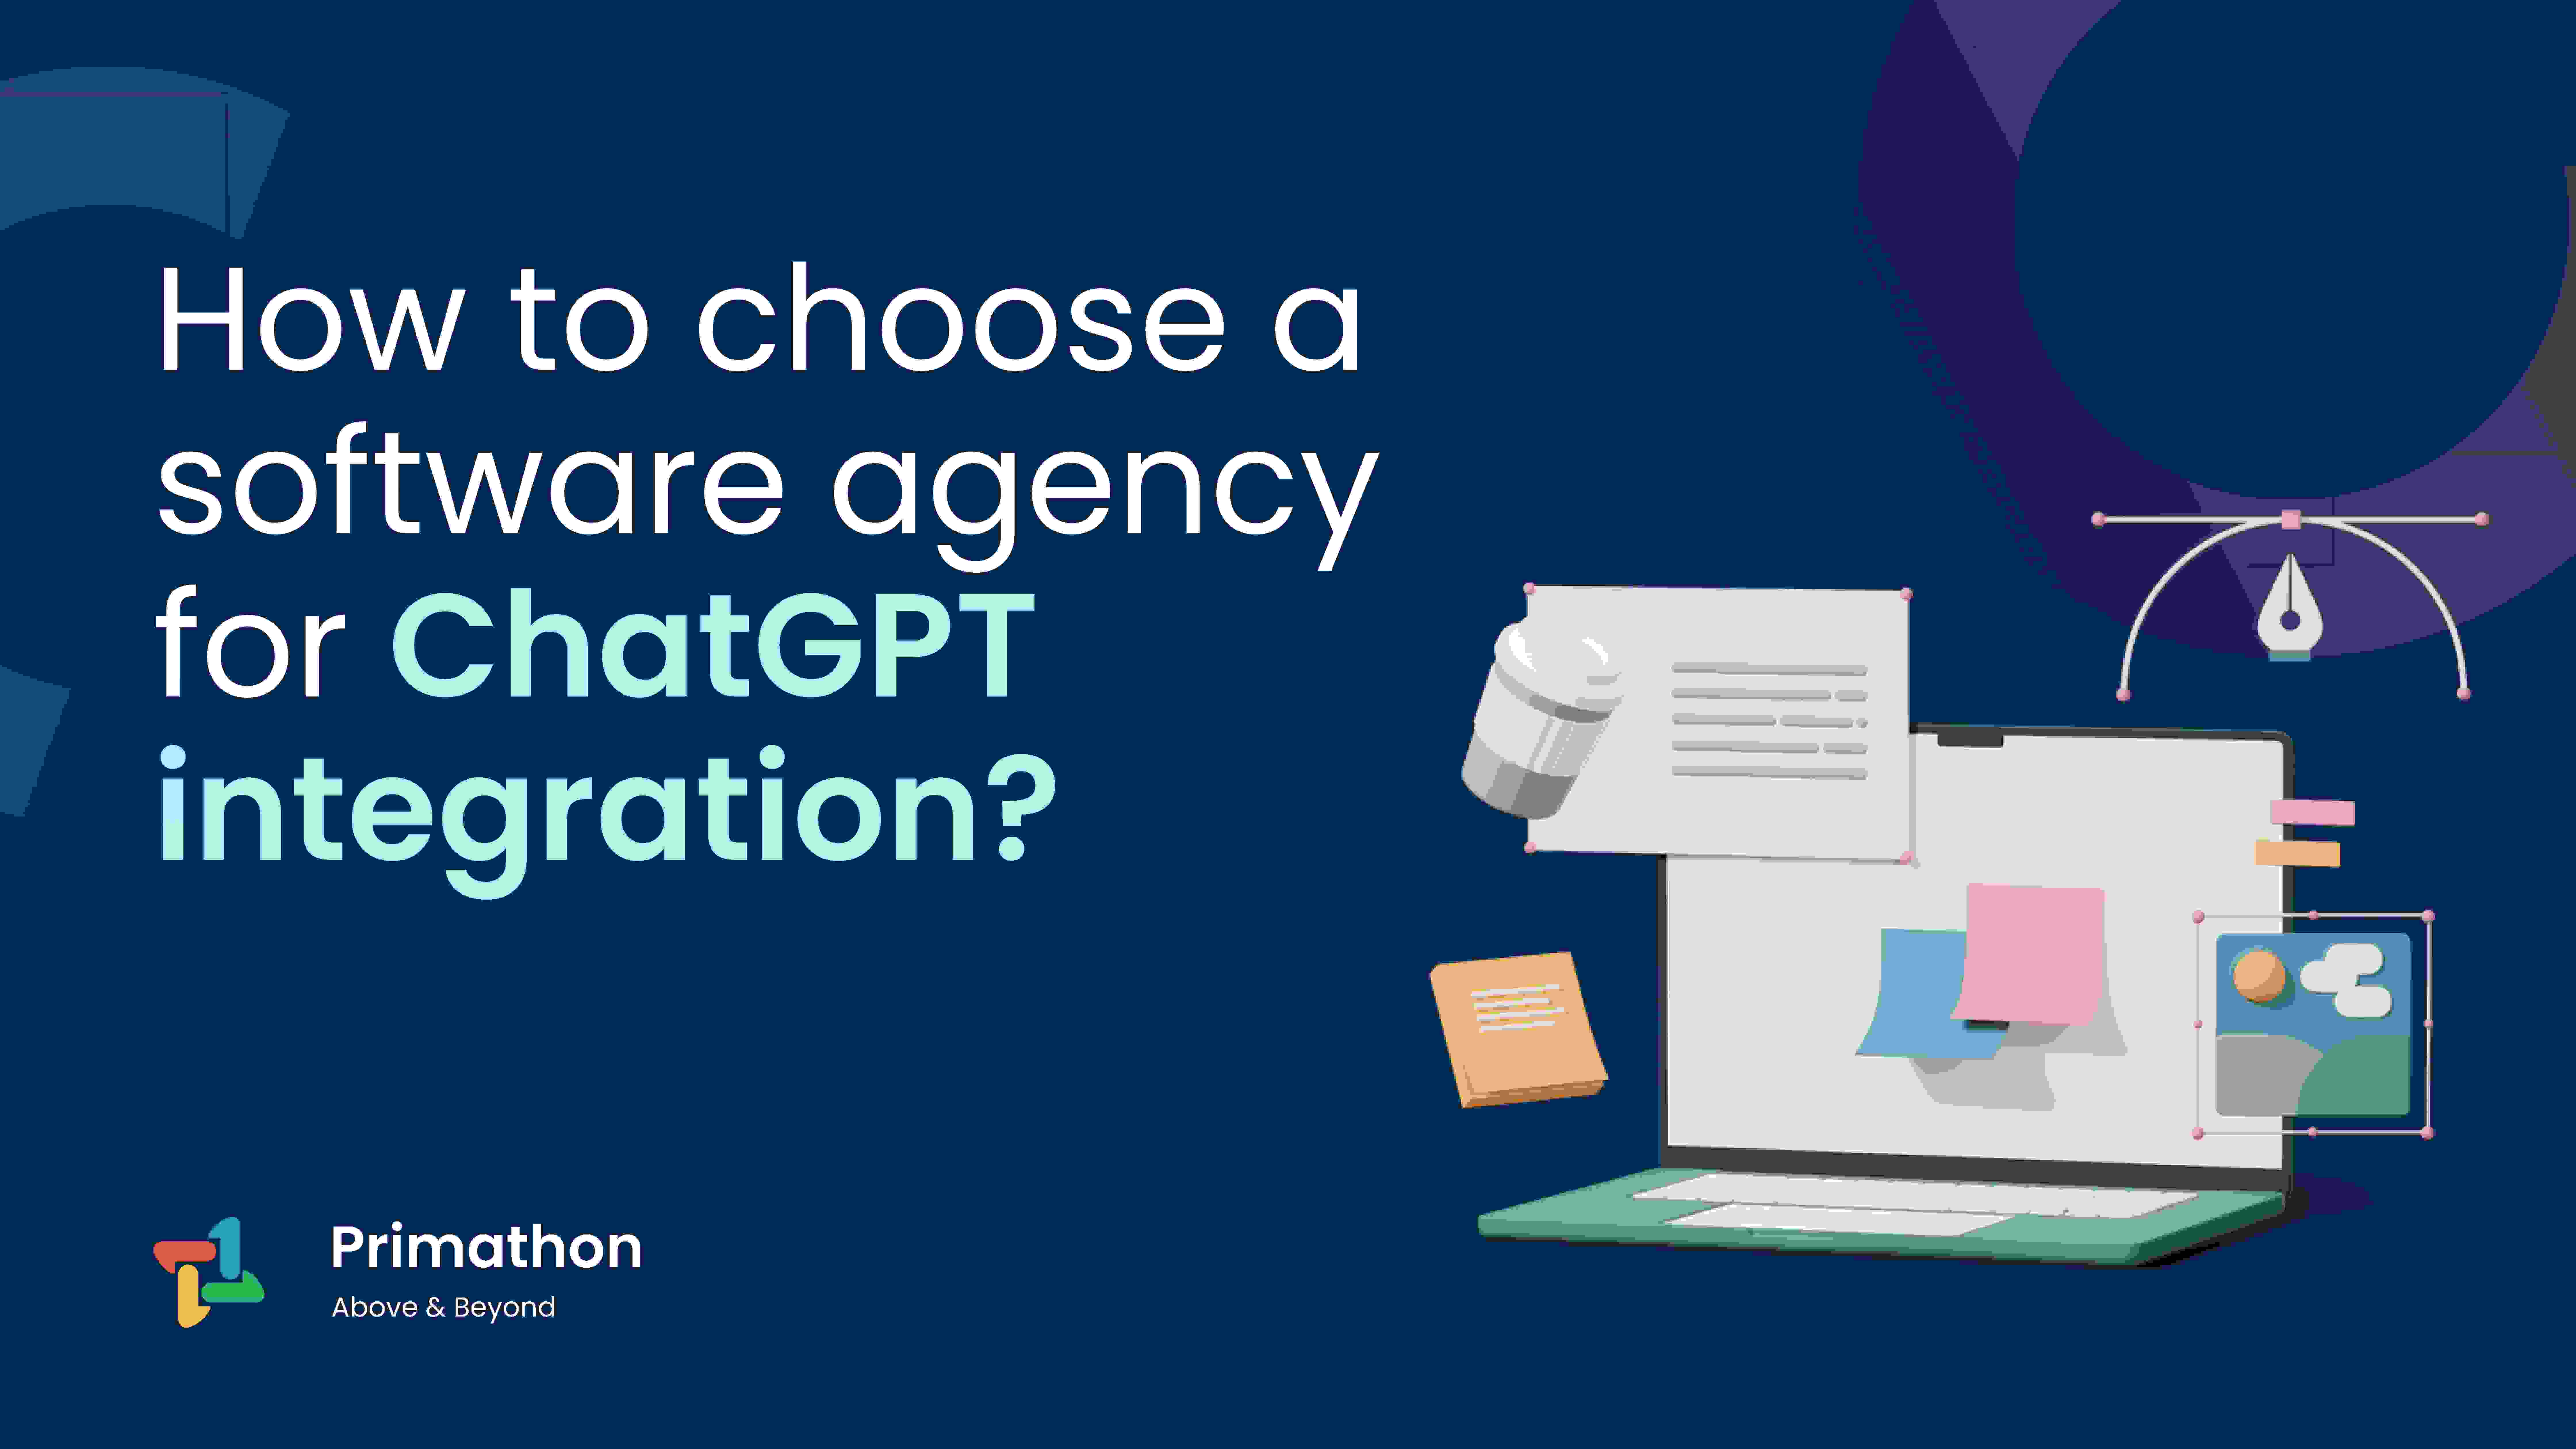 How to choose a software agency for ChatGPT integration?